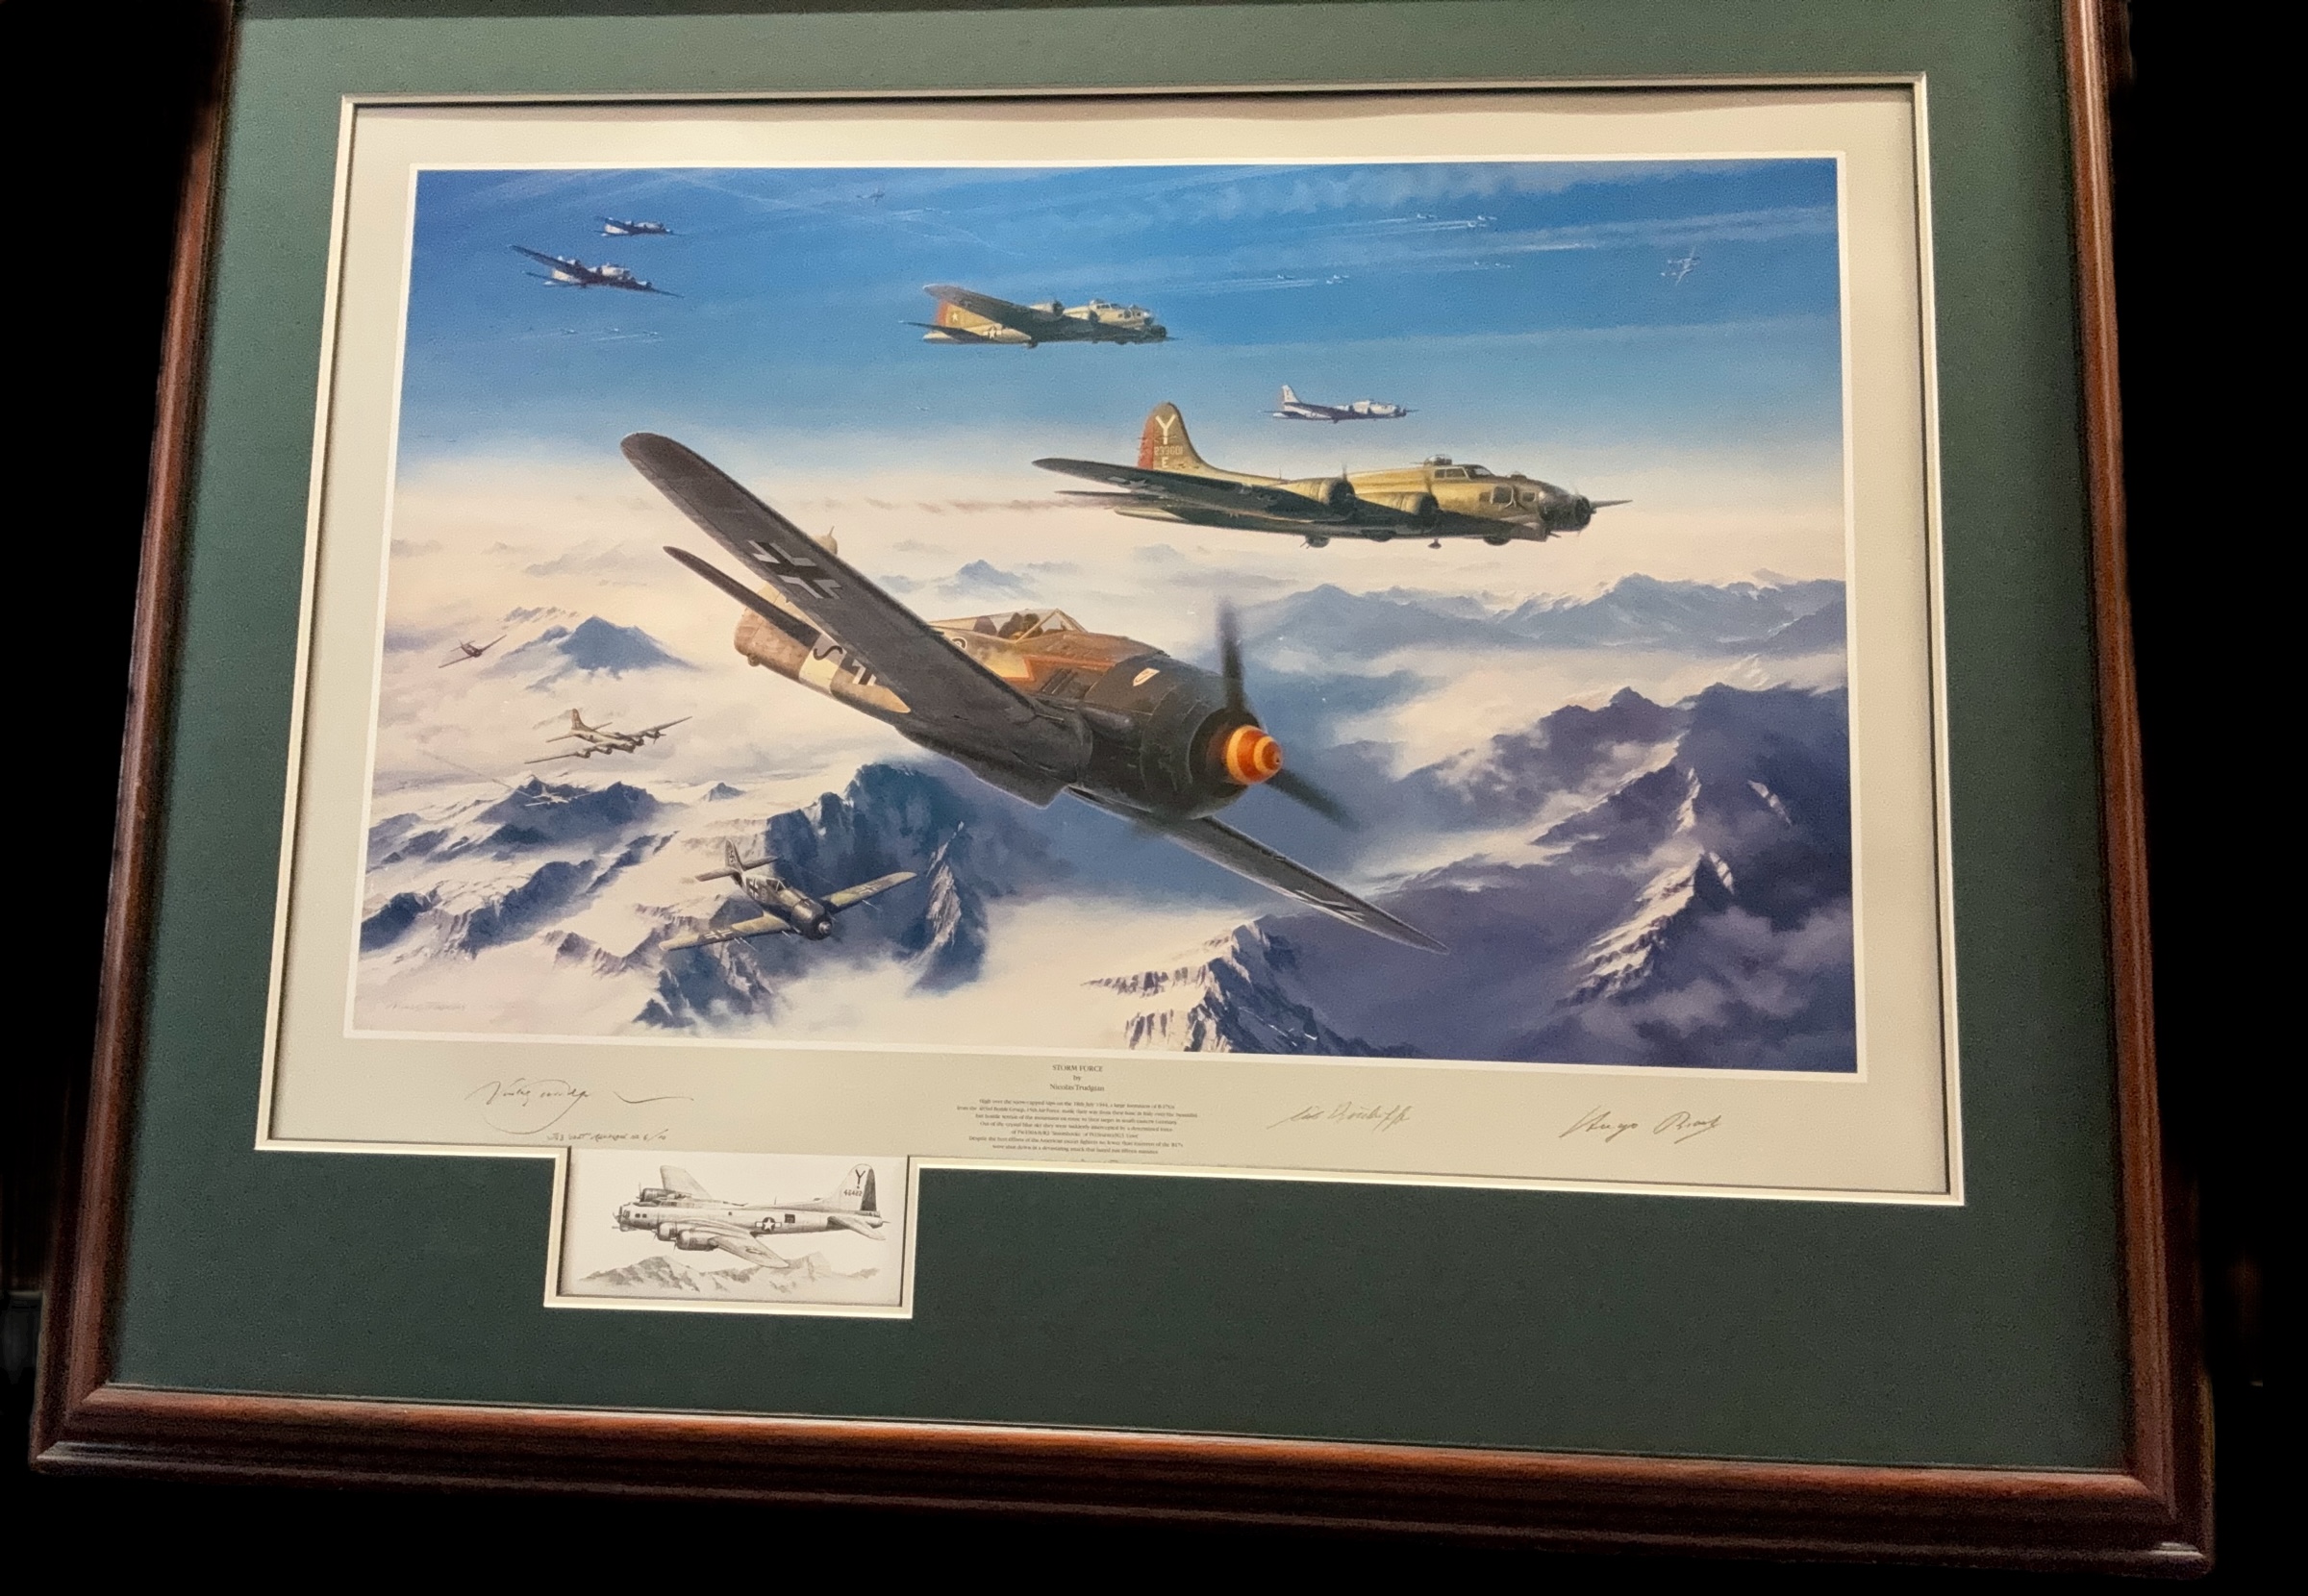 Storm Force WWII signed print 40x32 inch framed and mounted print JG3 UDET remarque No 6/10 includes - Image 2 of 3